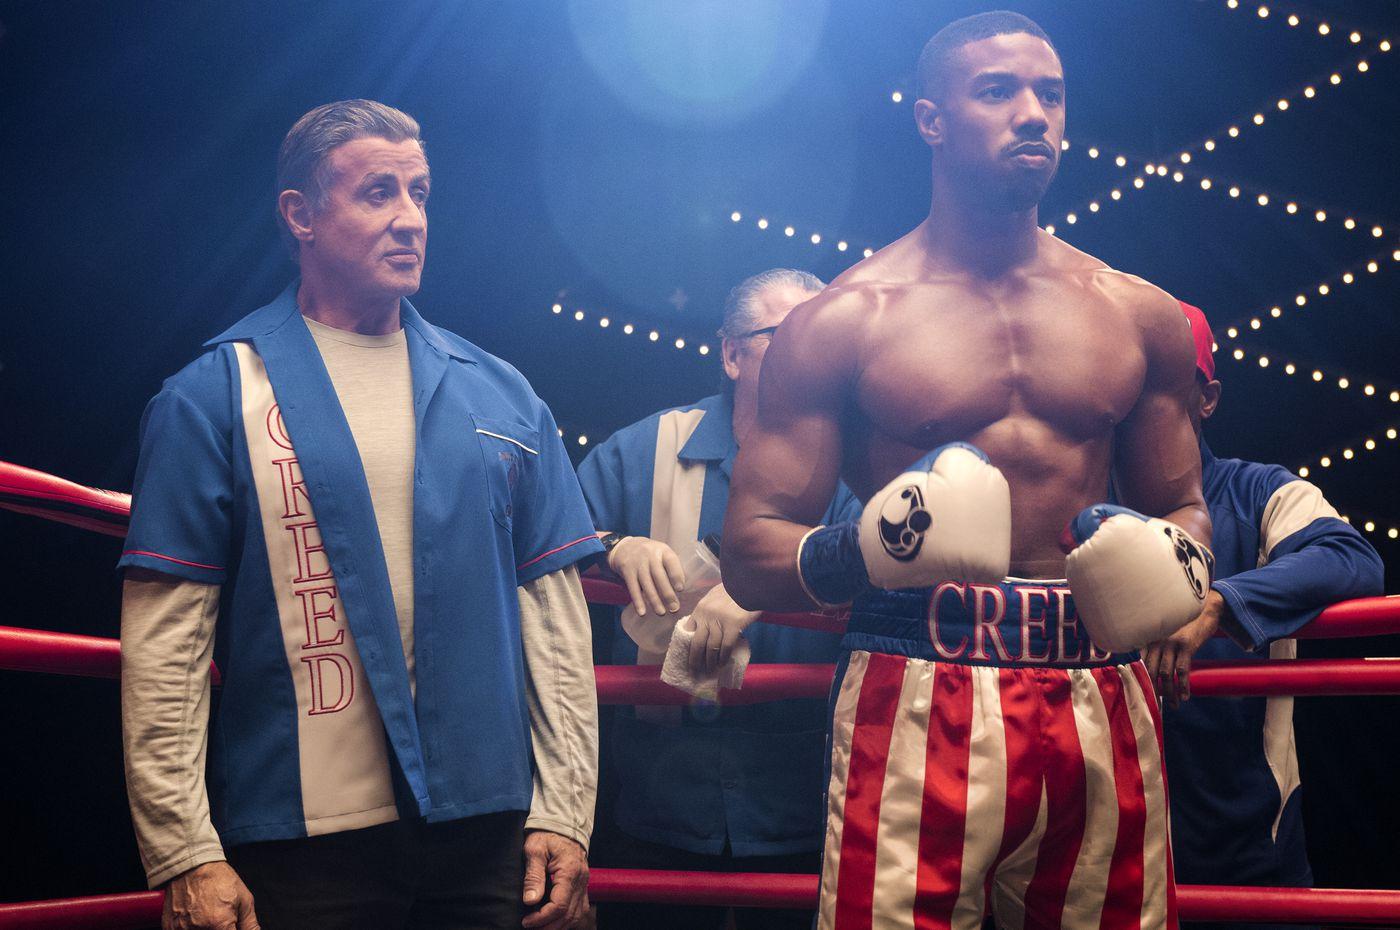 Creed II review: mired in decades of Rocky lore, but still